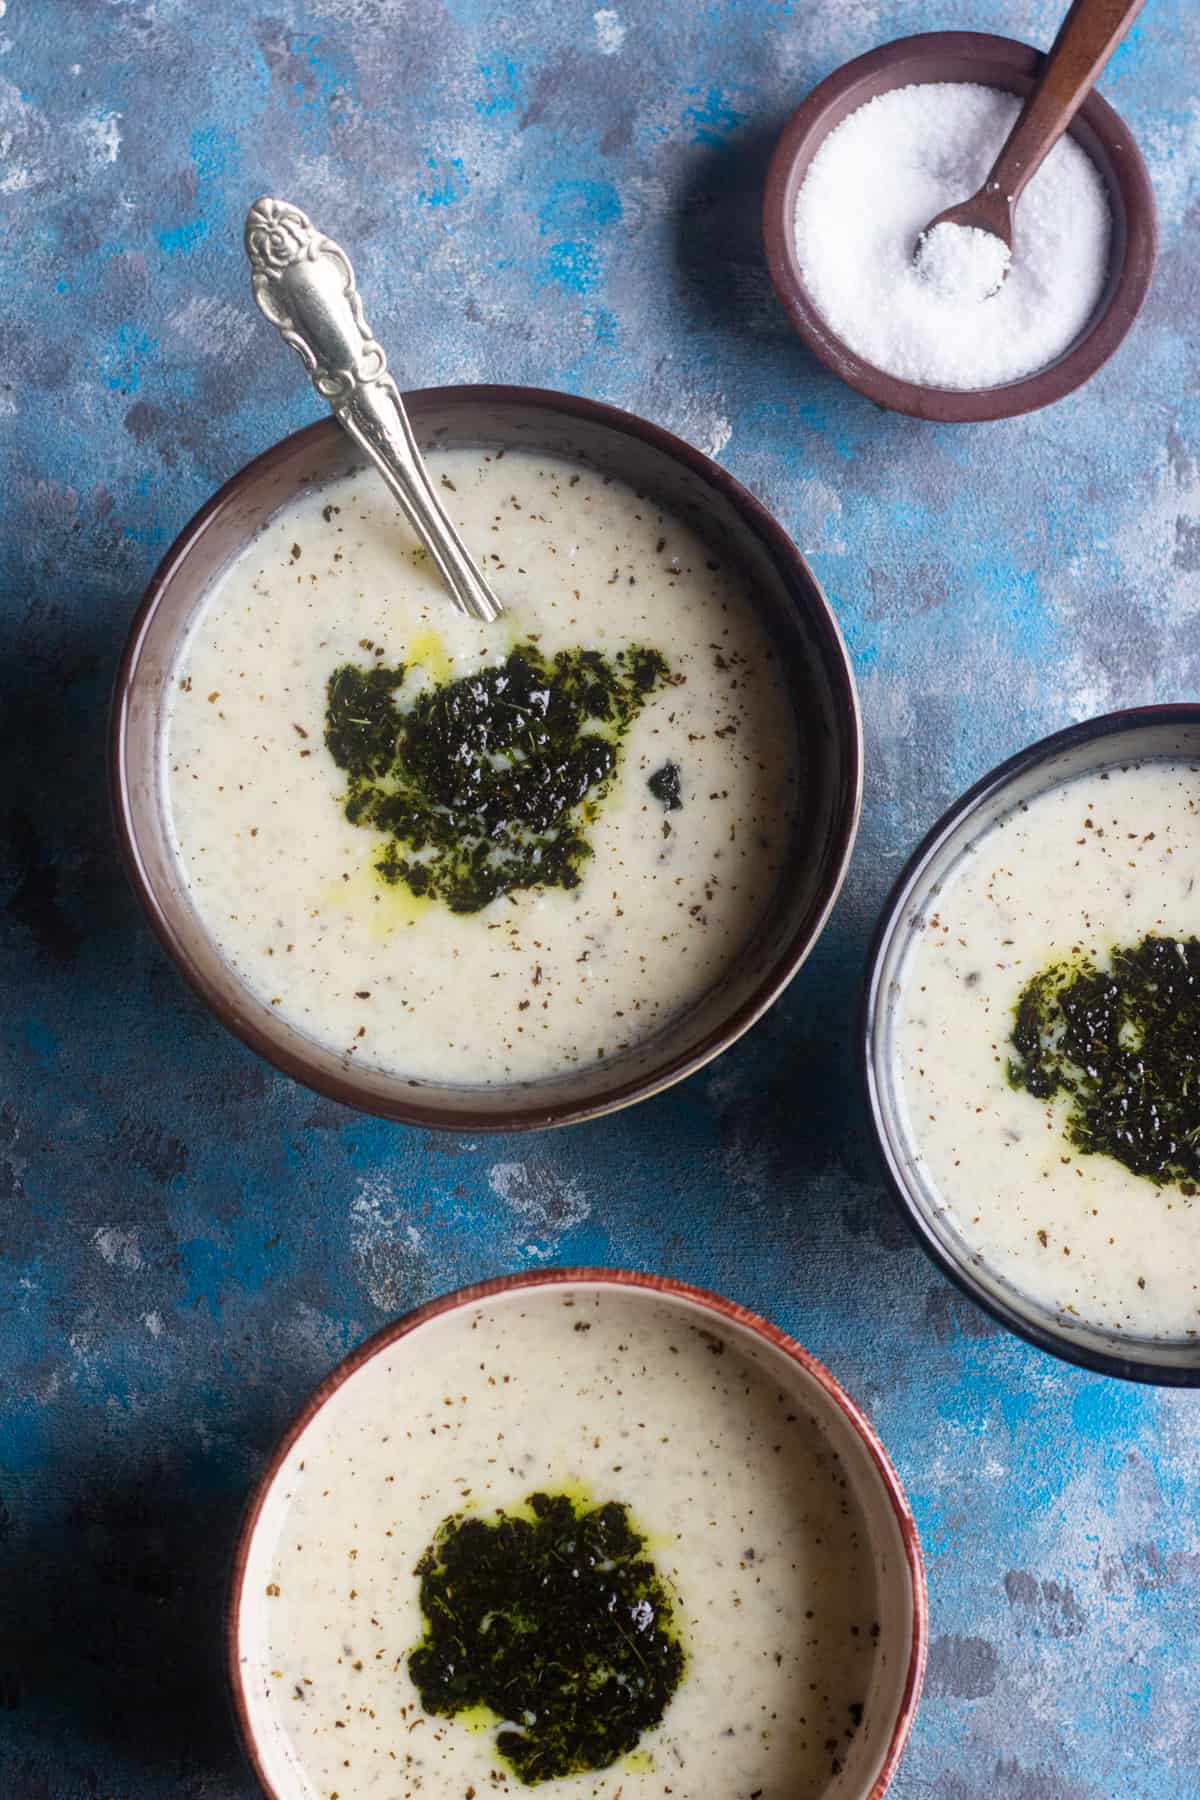 Turkish yogurt soup is the perfect option for a light meal. This warm yogurt soup is simple, healthy, and naturally vegetarian and gluten free.